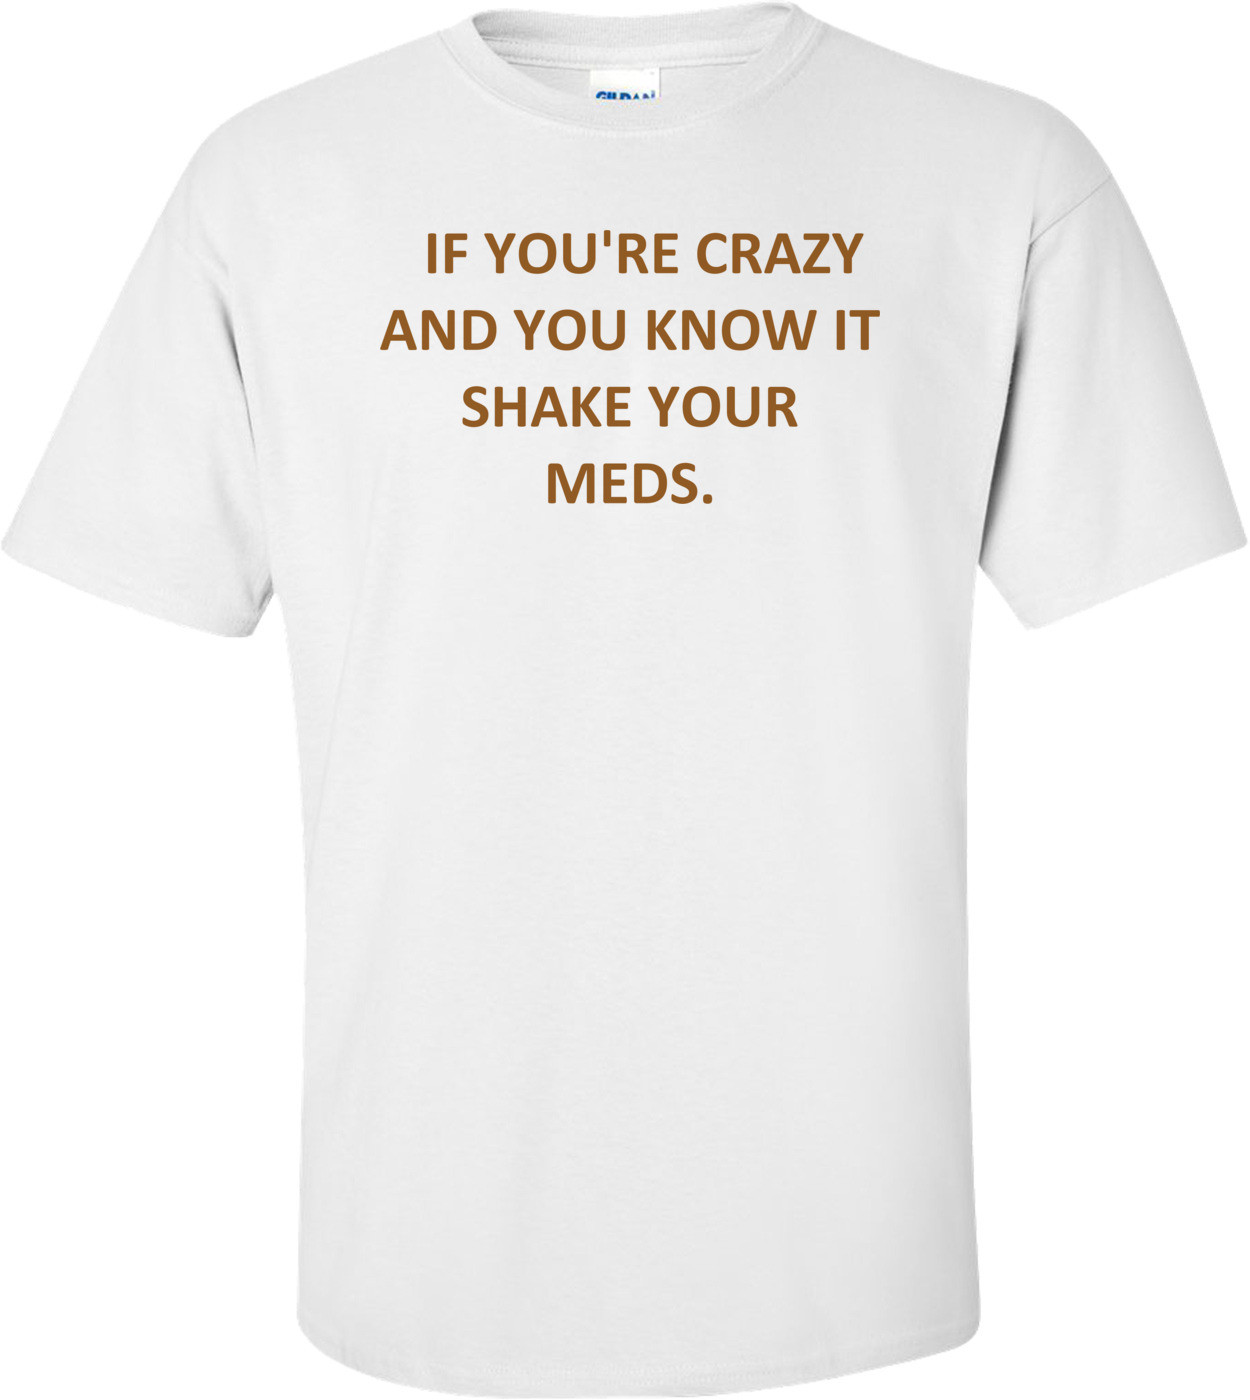   IF YOU'RE CRAZY AND YOU KNOW IT SHAKE YOUR MEDS. Shirt